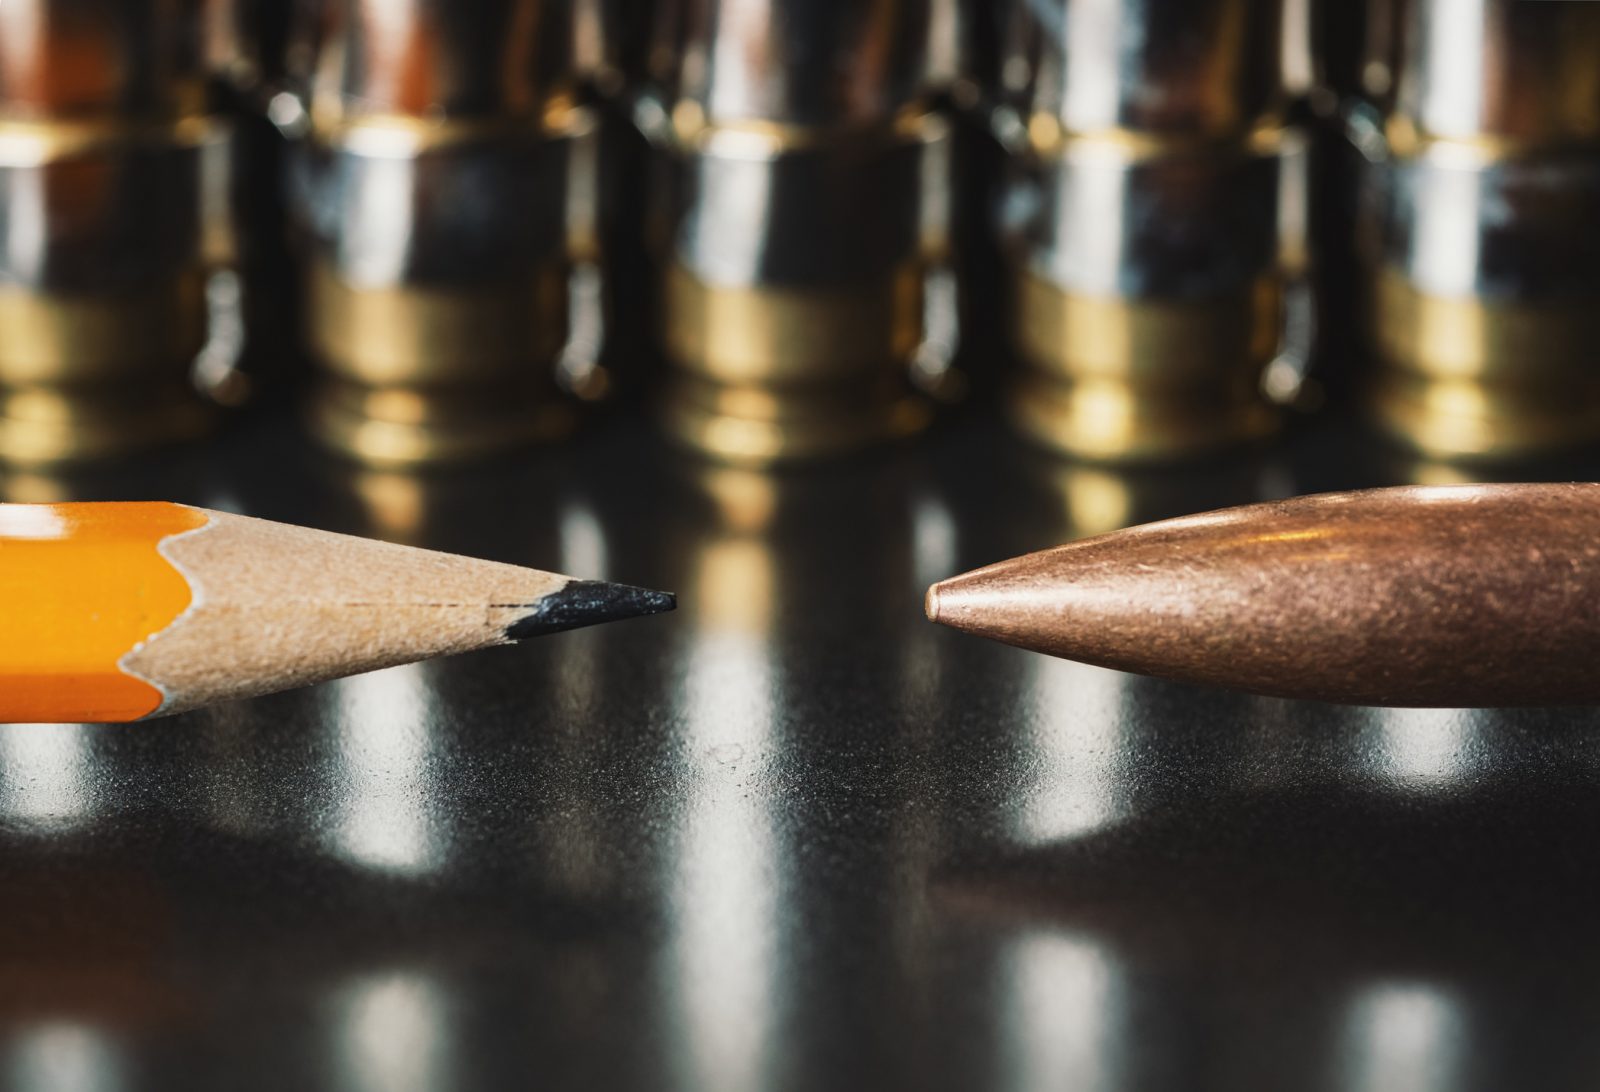 A pencil tip is pointed inwards on the left and a bullet tip pointed inwards on the right.